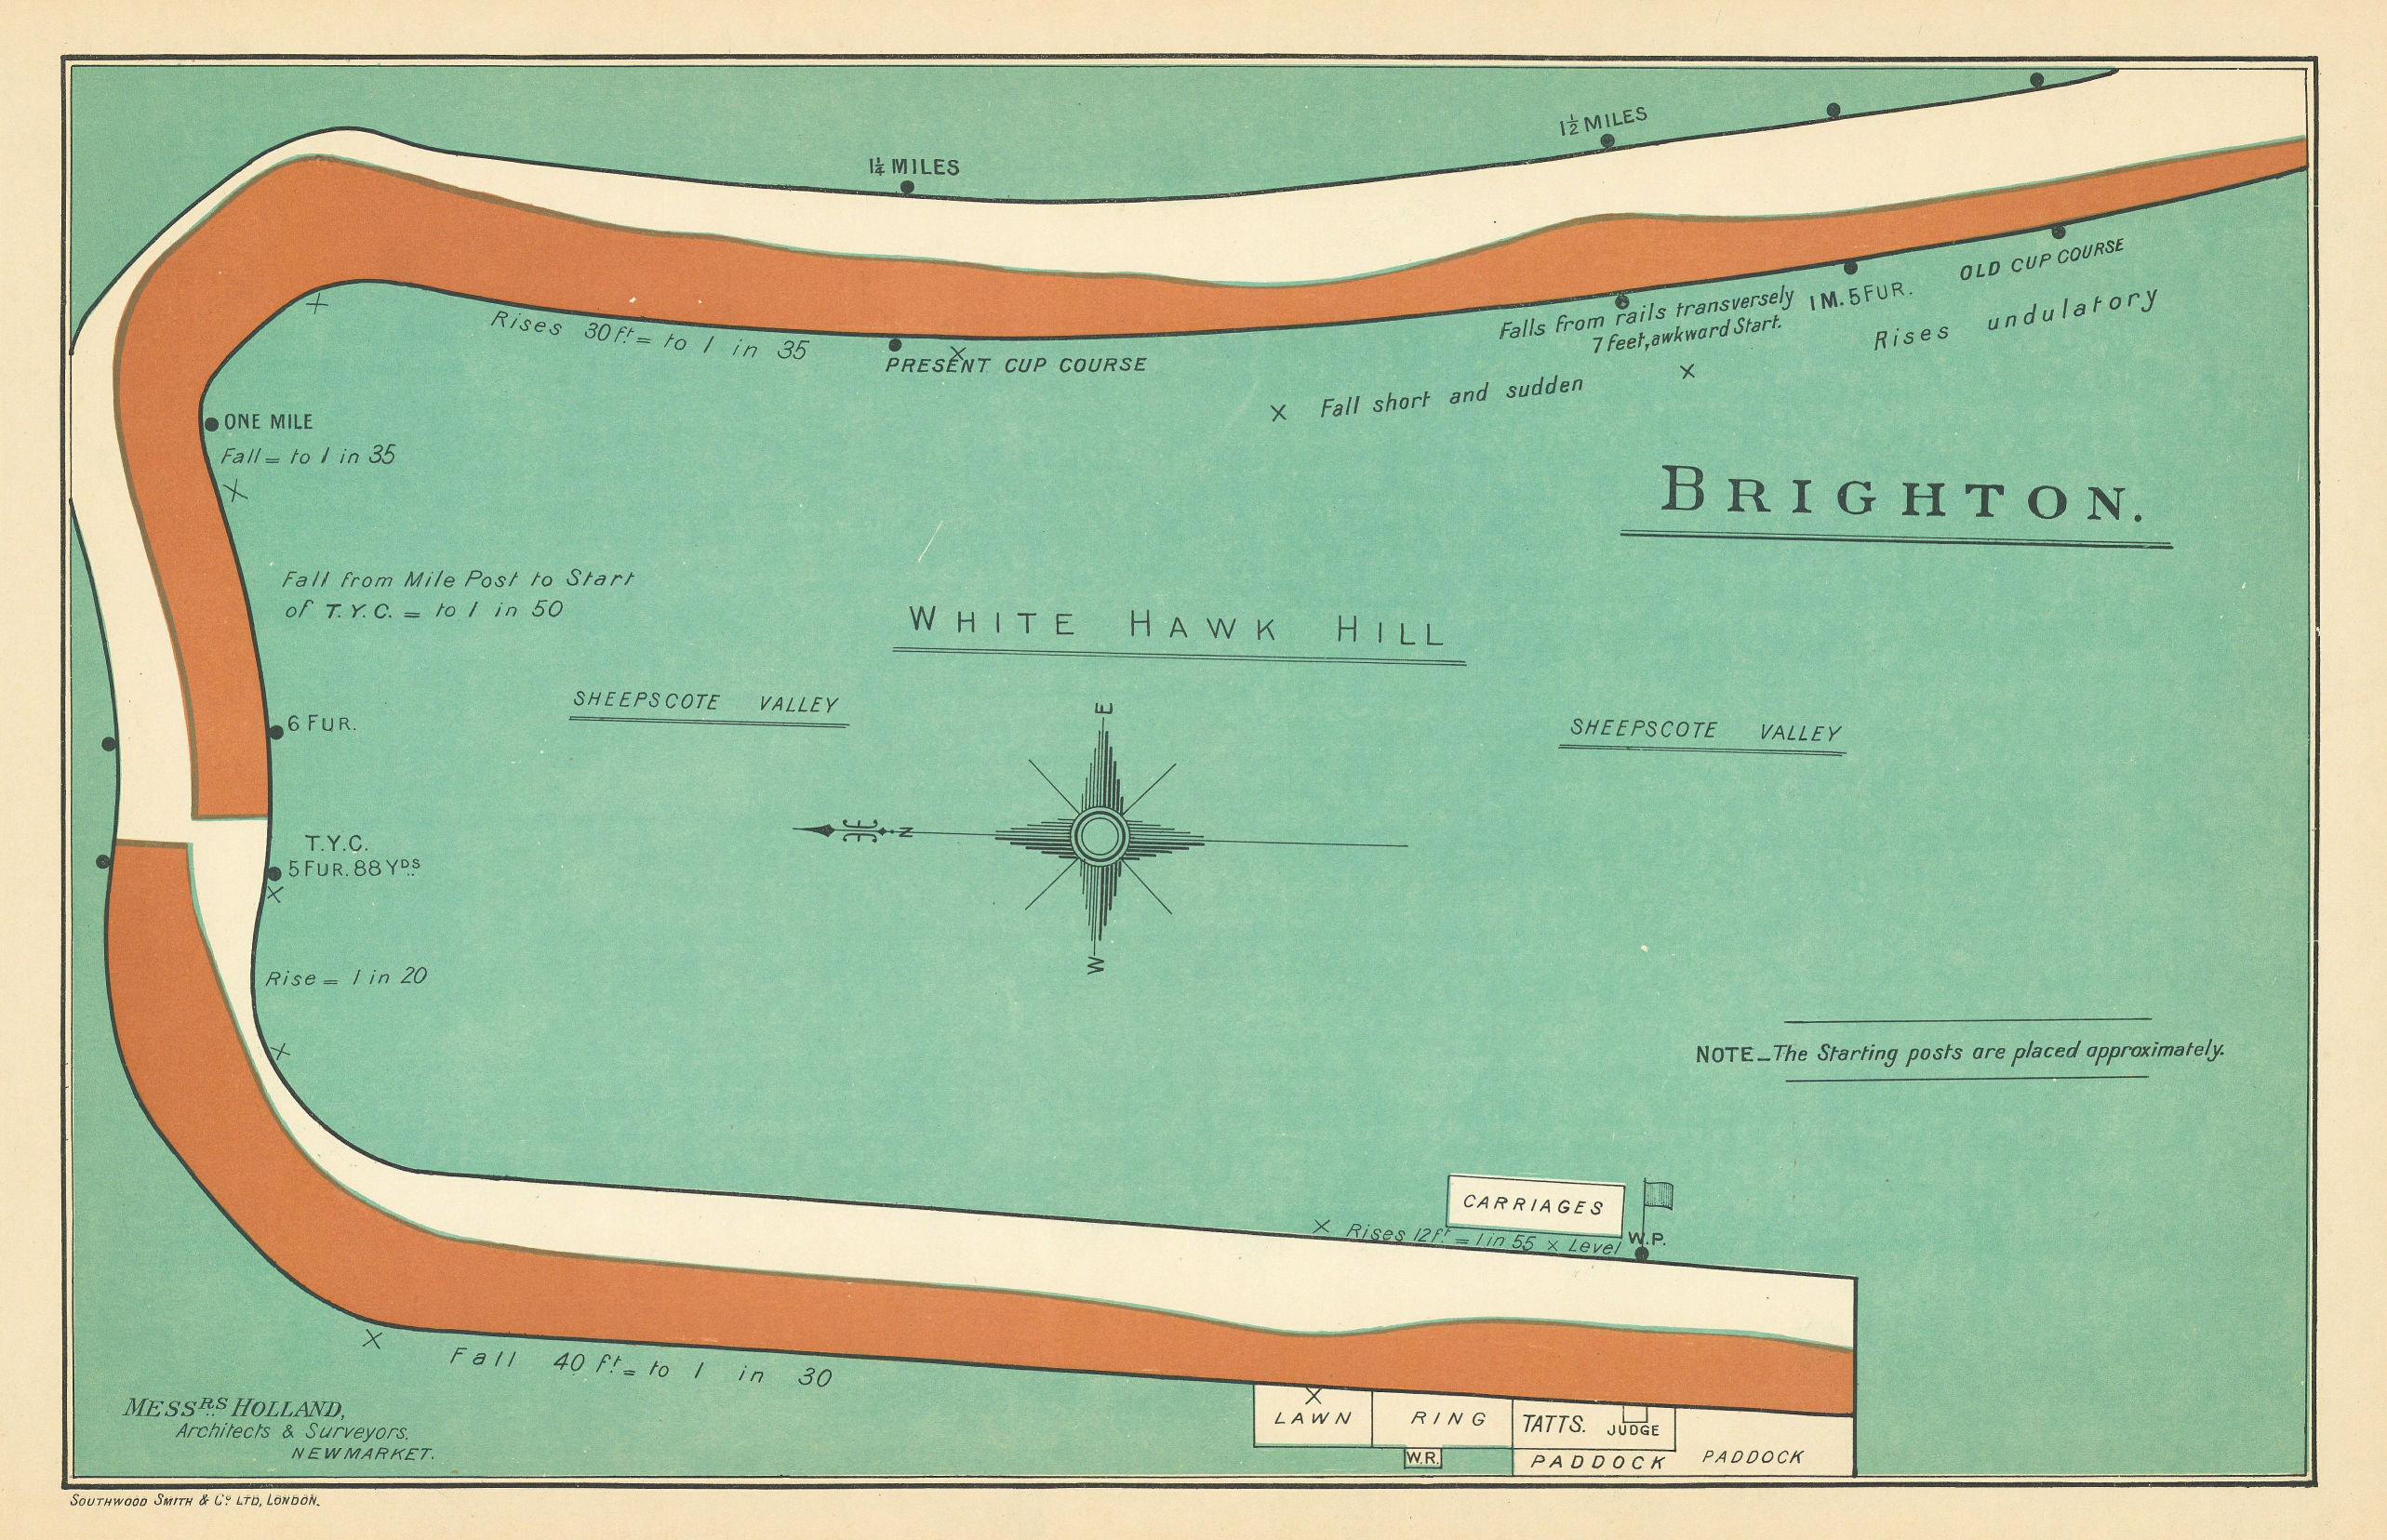 Brighton - White Hawk Hill racecourse, Sussex. BAYLES 1903 old antique map